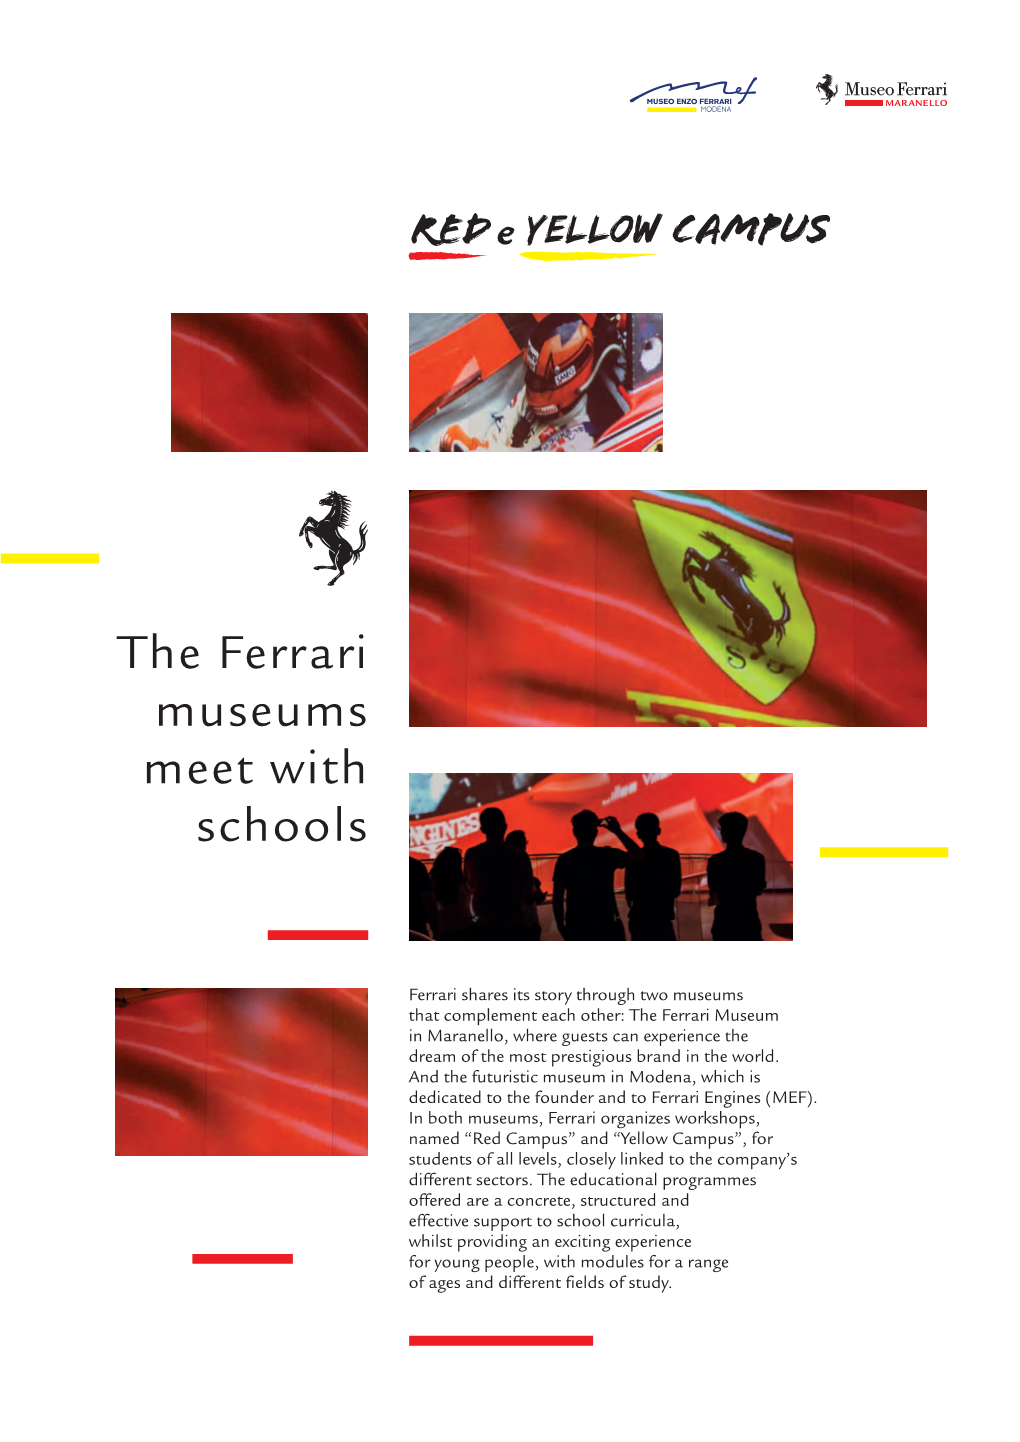 The Ferrari Museums Meet with Schools